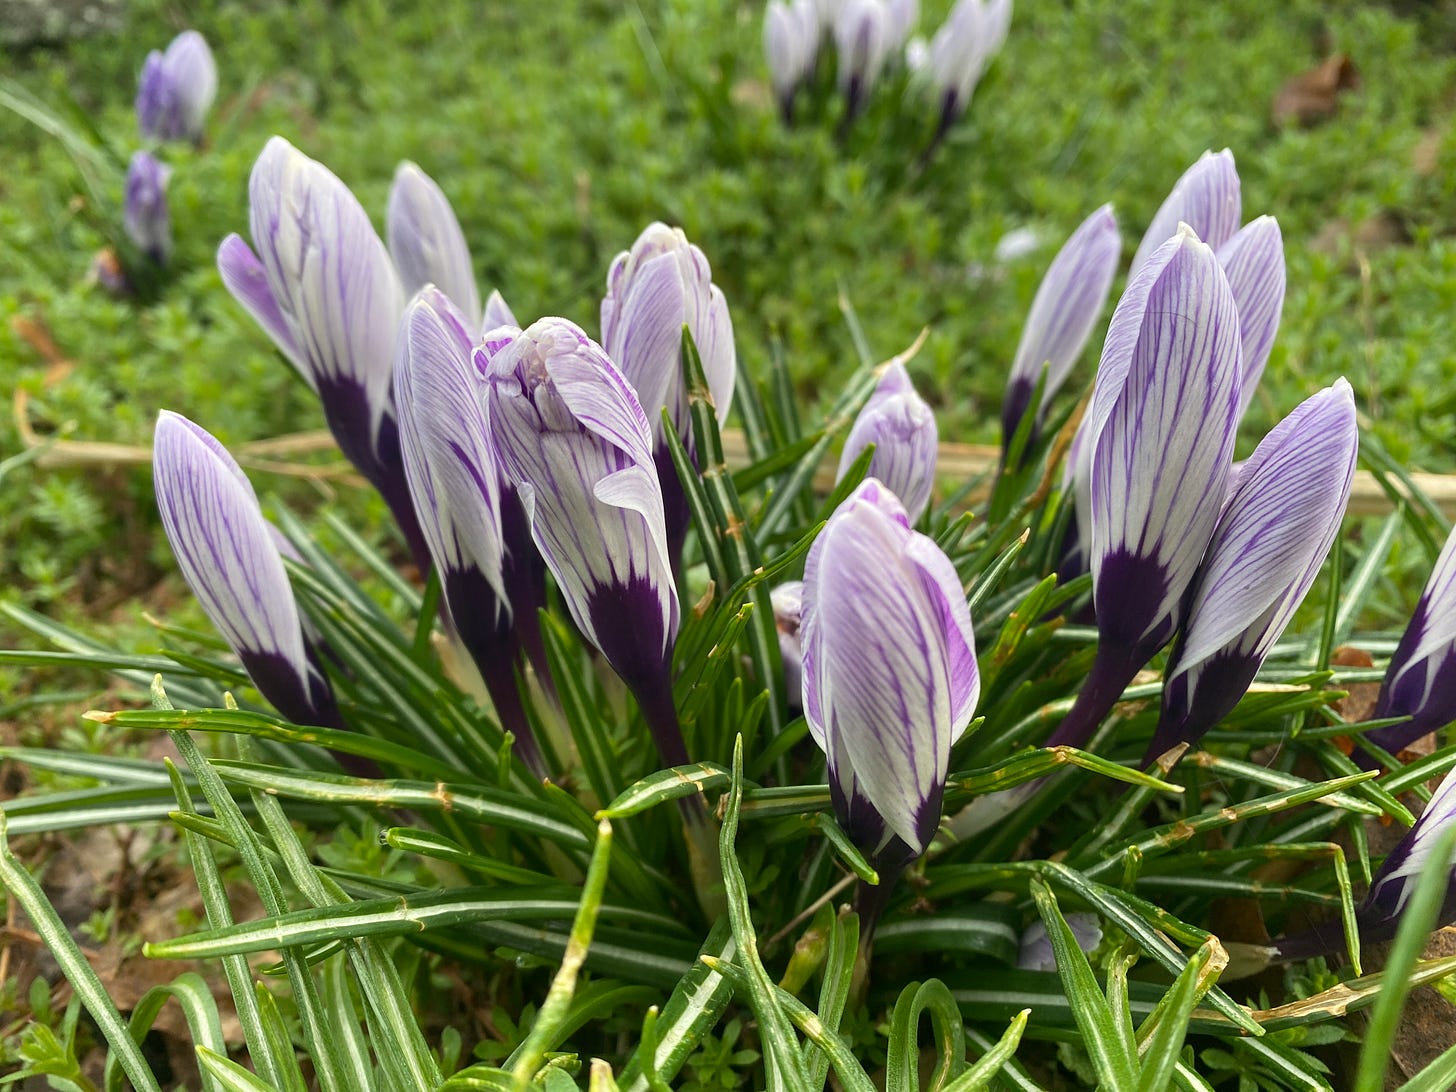 light purple flowers, not opened, in the grass